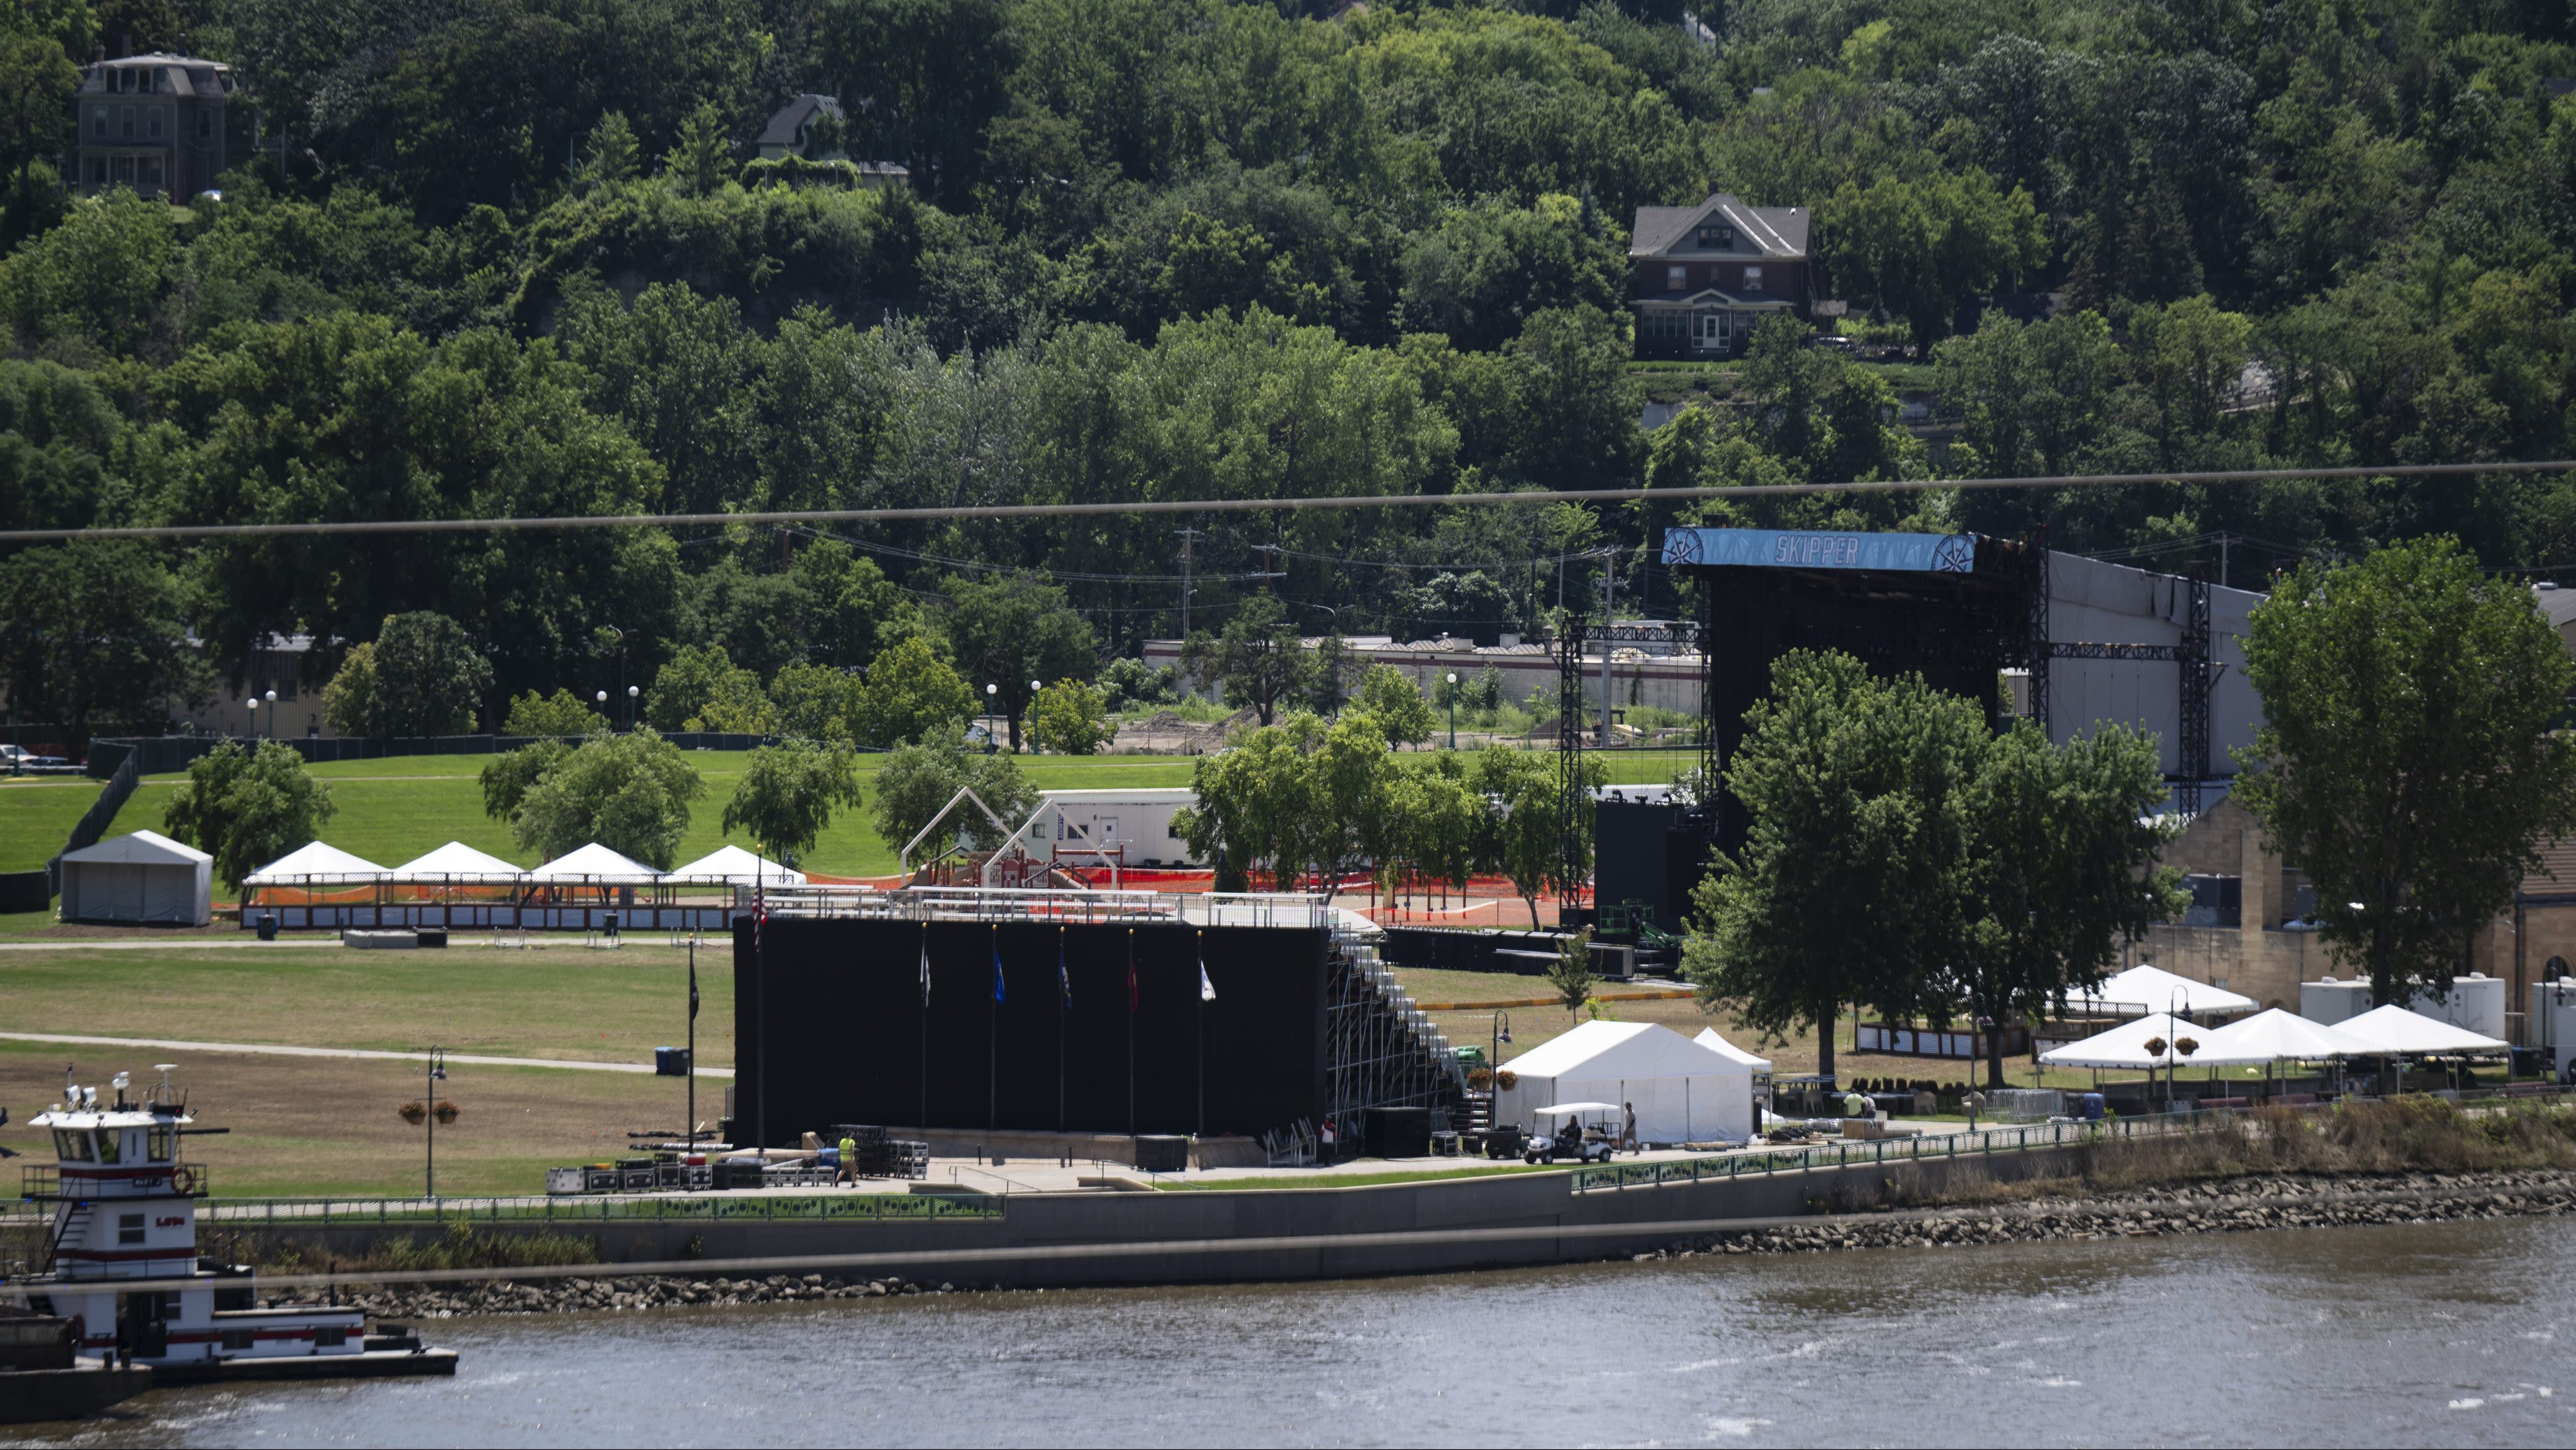 What to know if you’re headed to the Minnesota Yacht Club Festival